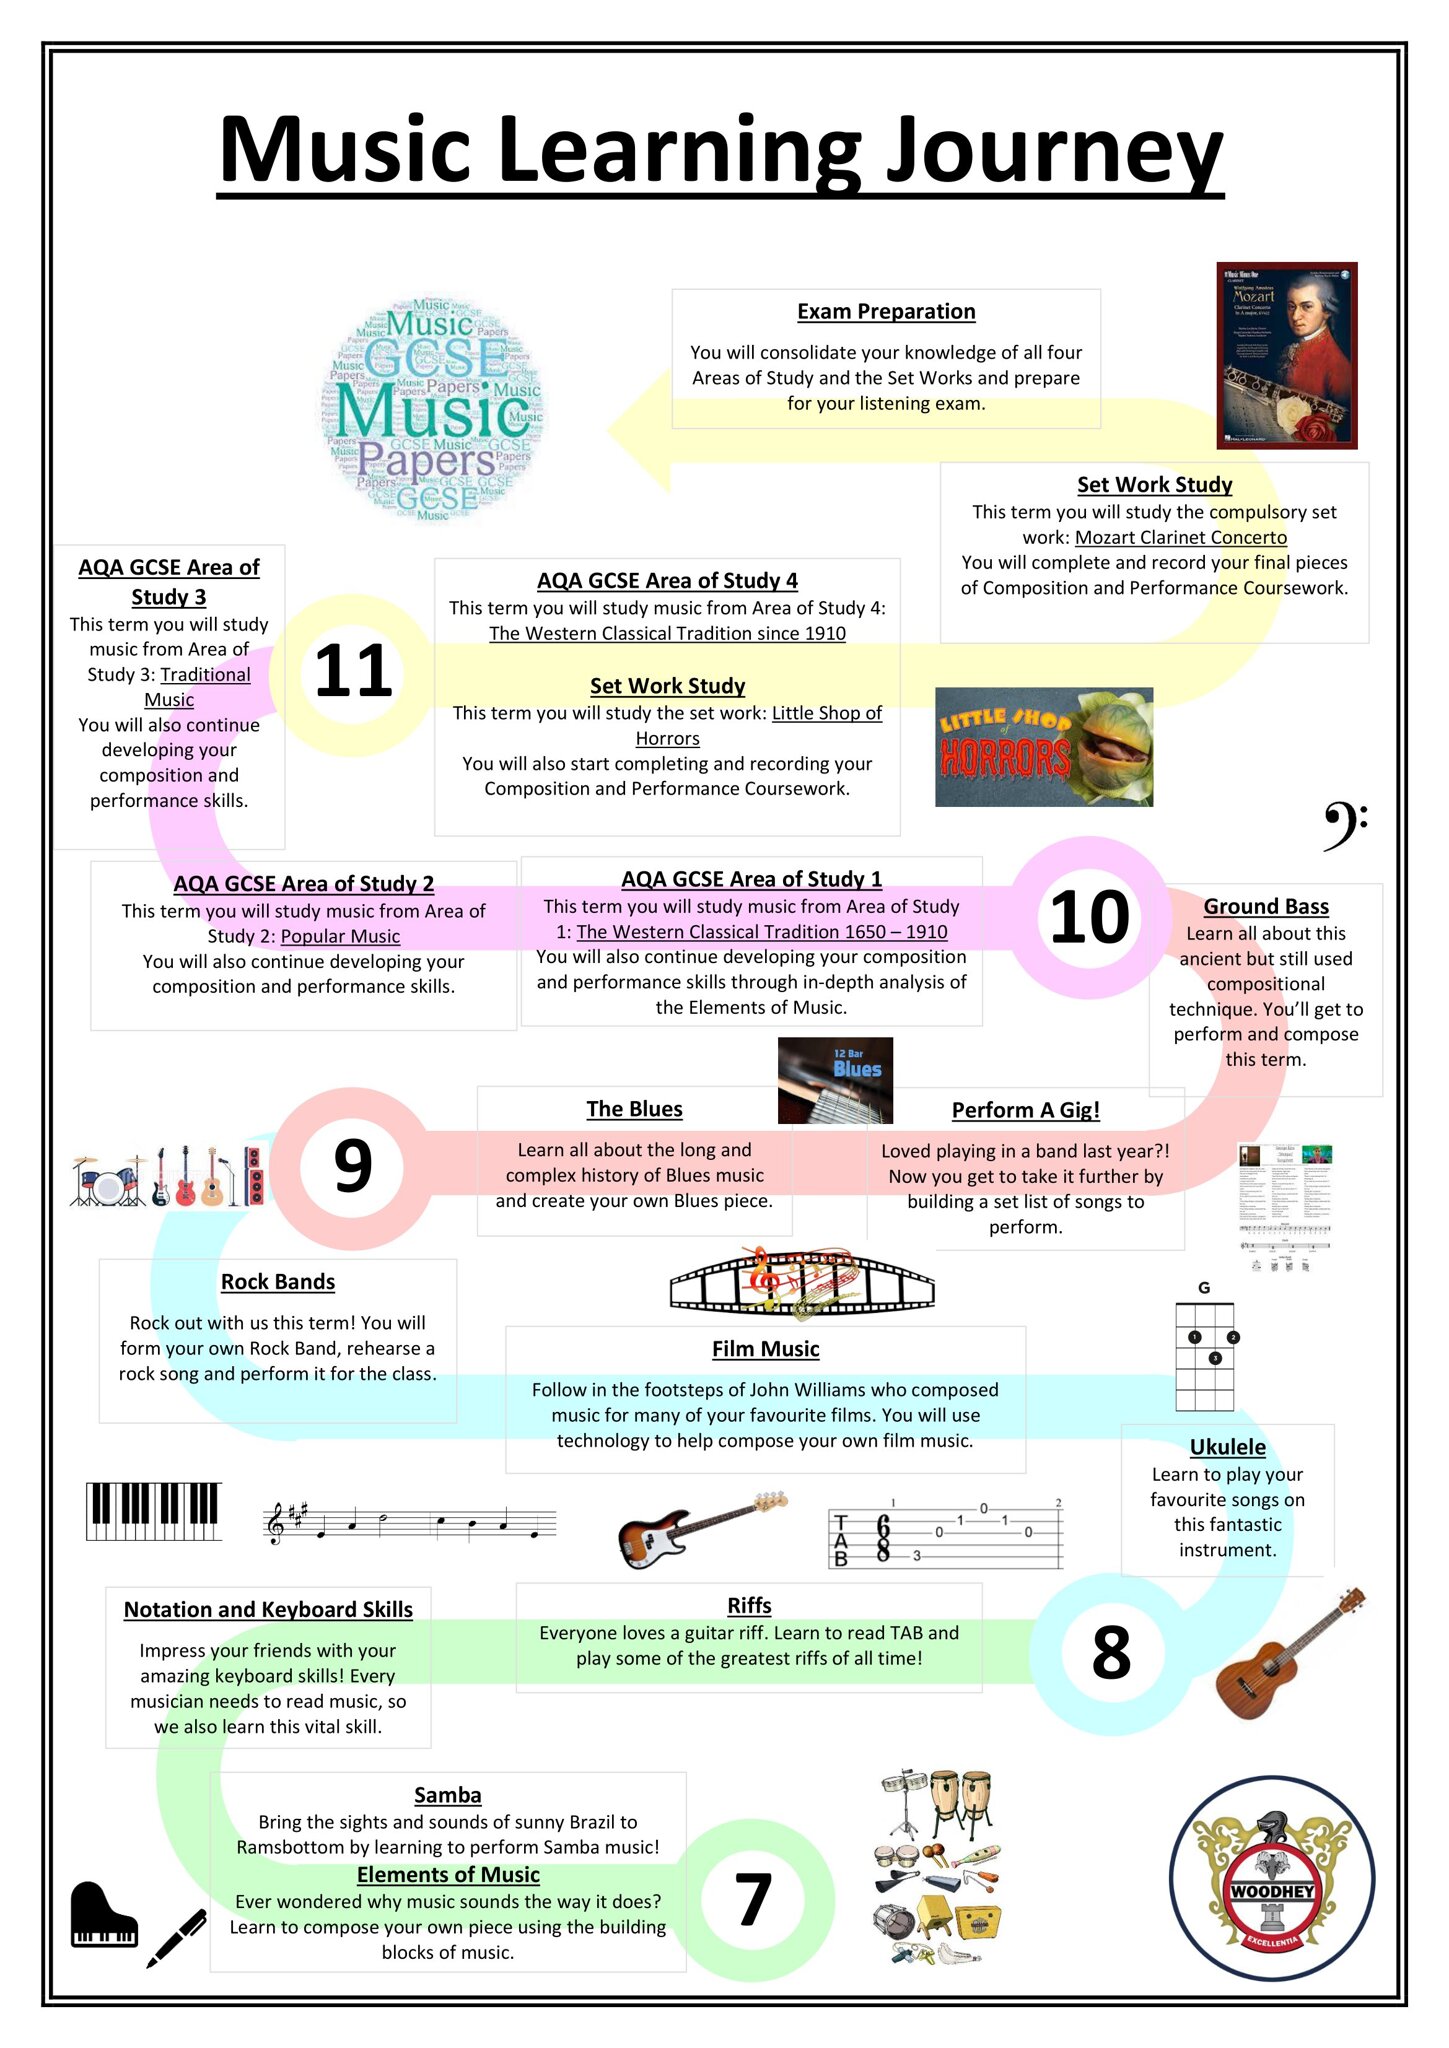 Music Learning Journey